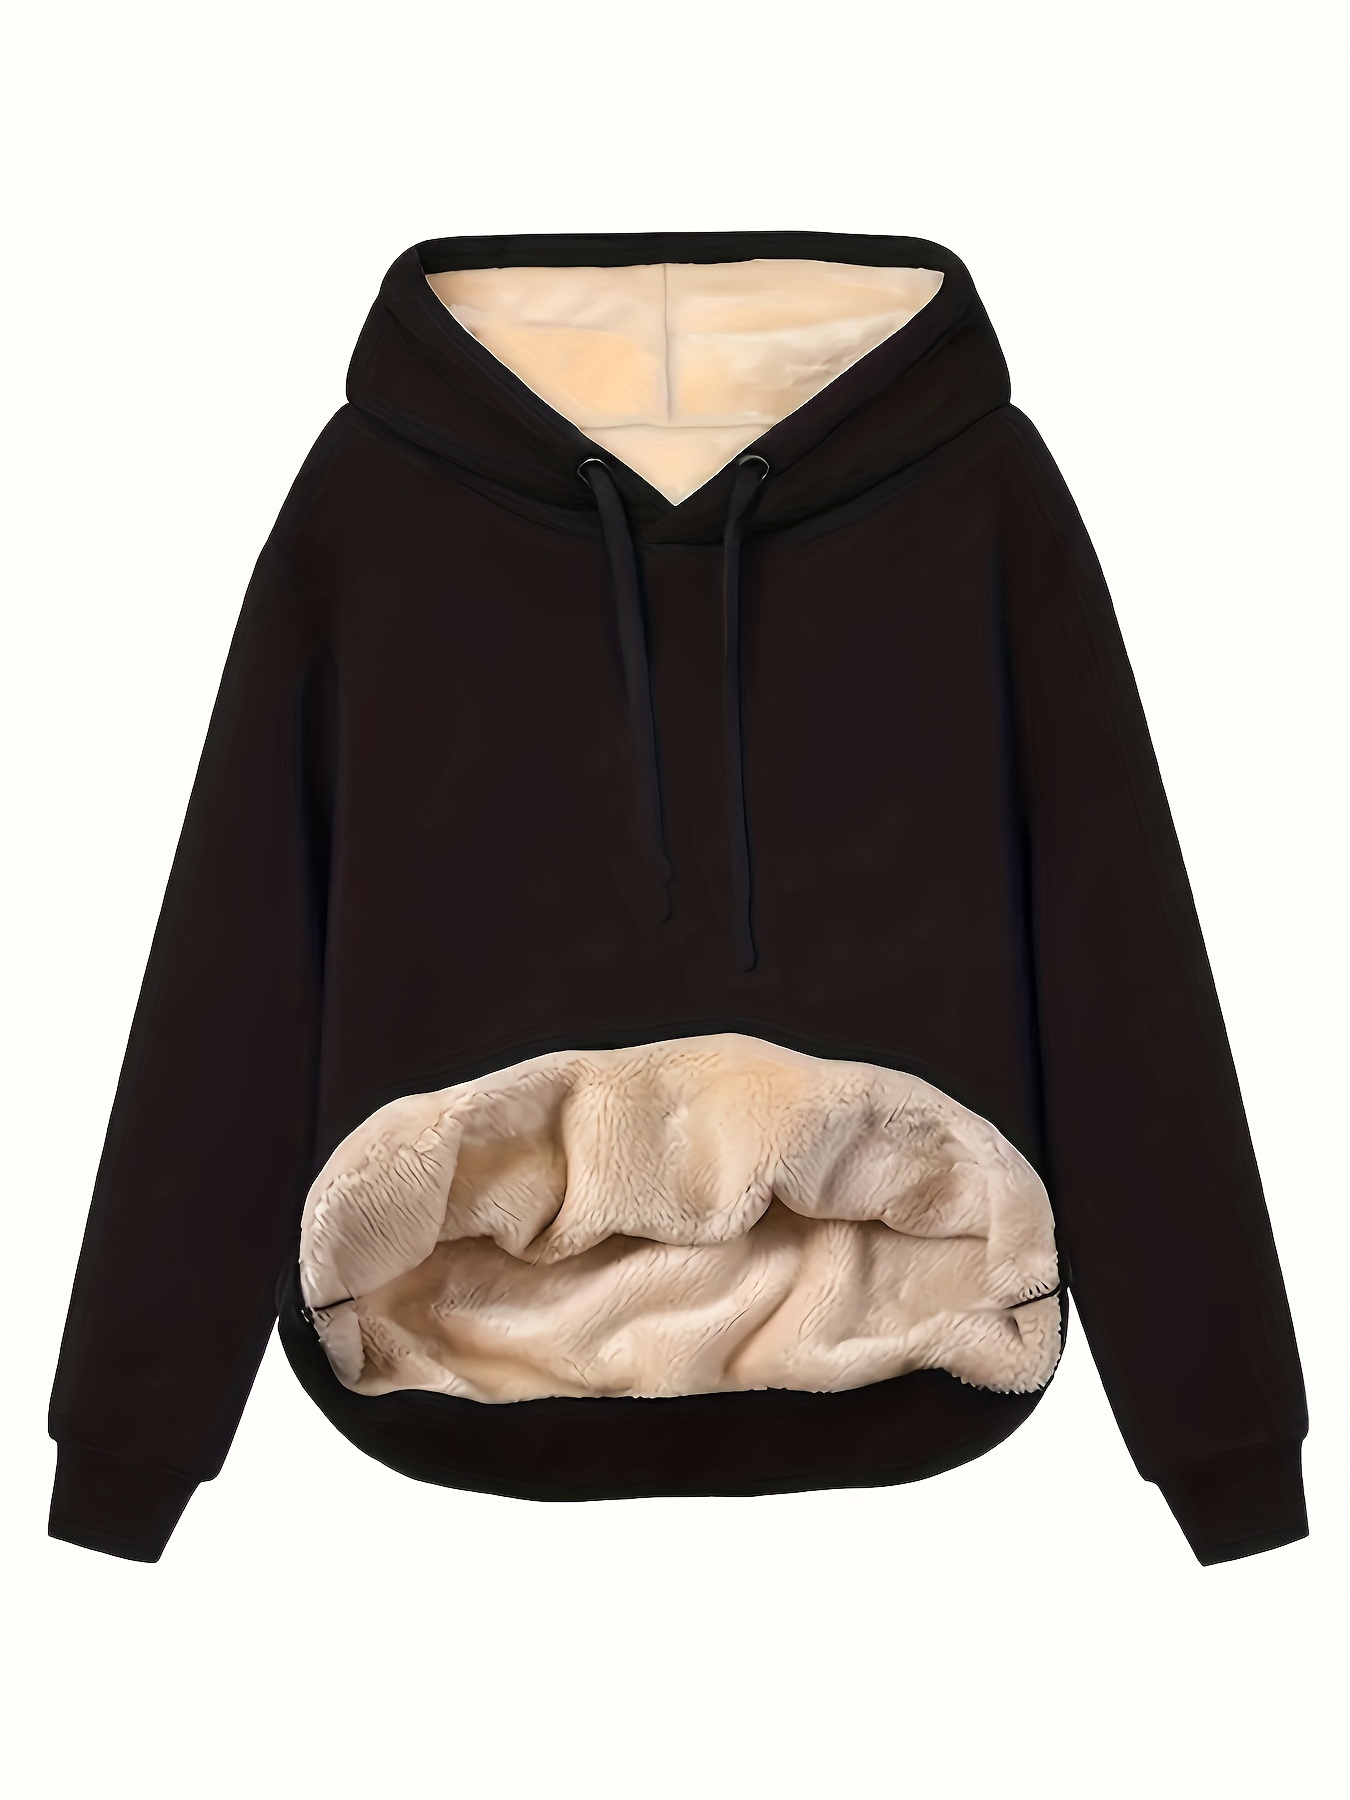 Chill Time Plush Pullover Hoodie | Hooded Sweatshirt, Large / Heathered Maroon